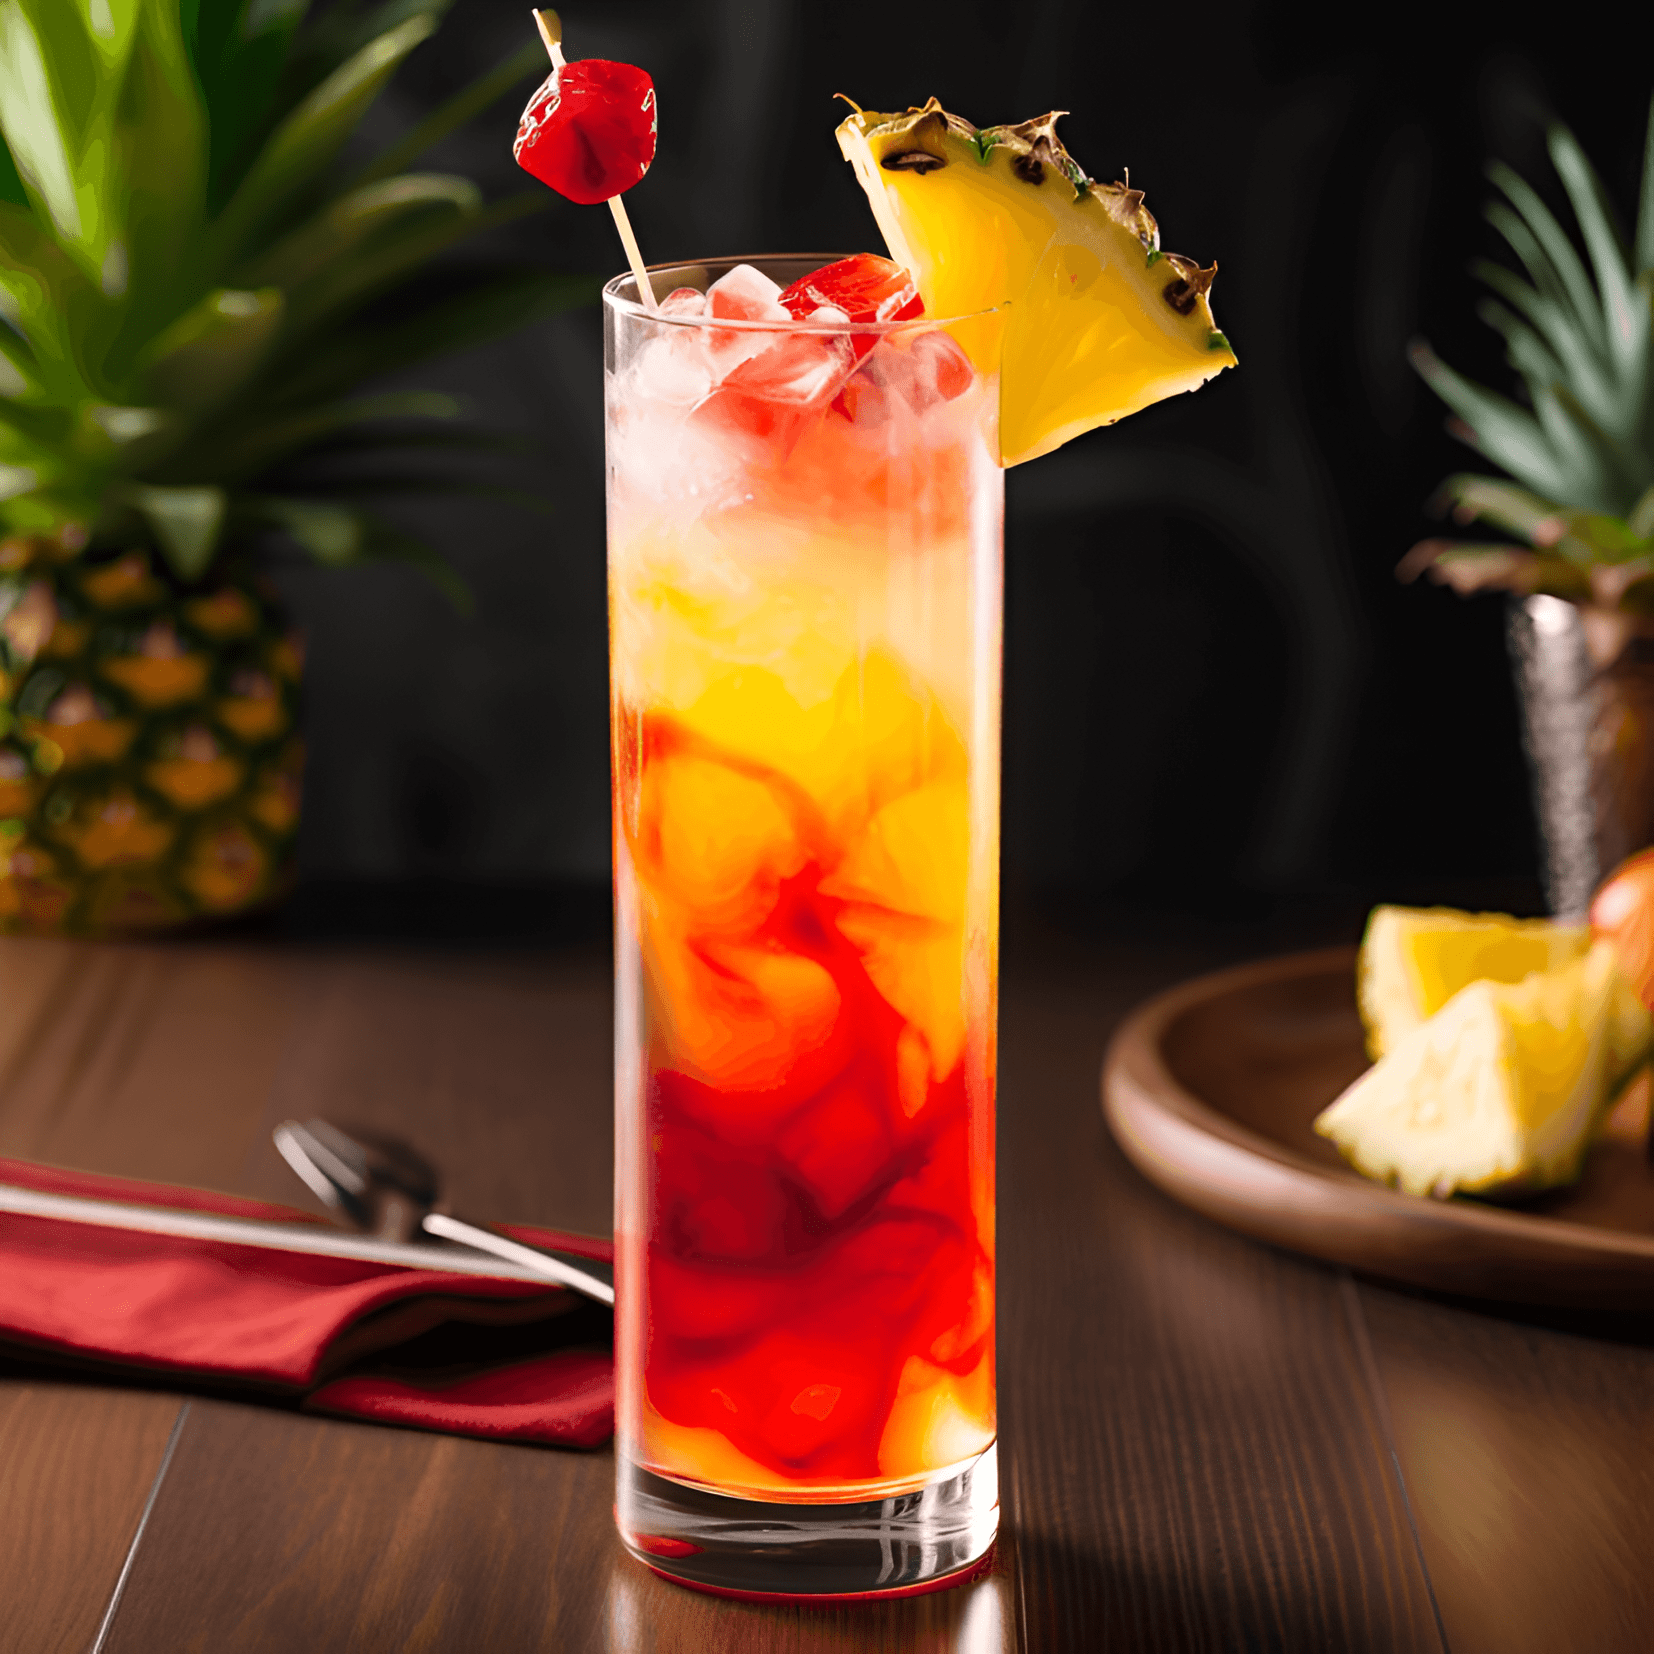 Maui Cocktail Recipe - The Maui cocktail is a sweet, fruity, and refreshing drink with a hint of tartness. The combination of pineapple, orange, and cranberry juices creates a well-balanced and tropical flavor profile, while the coconut rum adds a smooth and creamy finish.